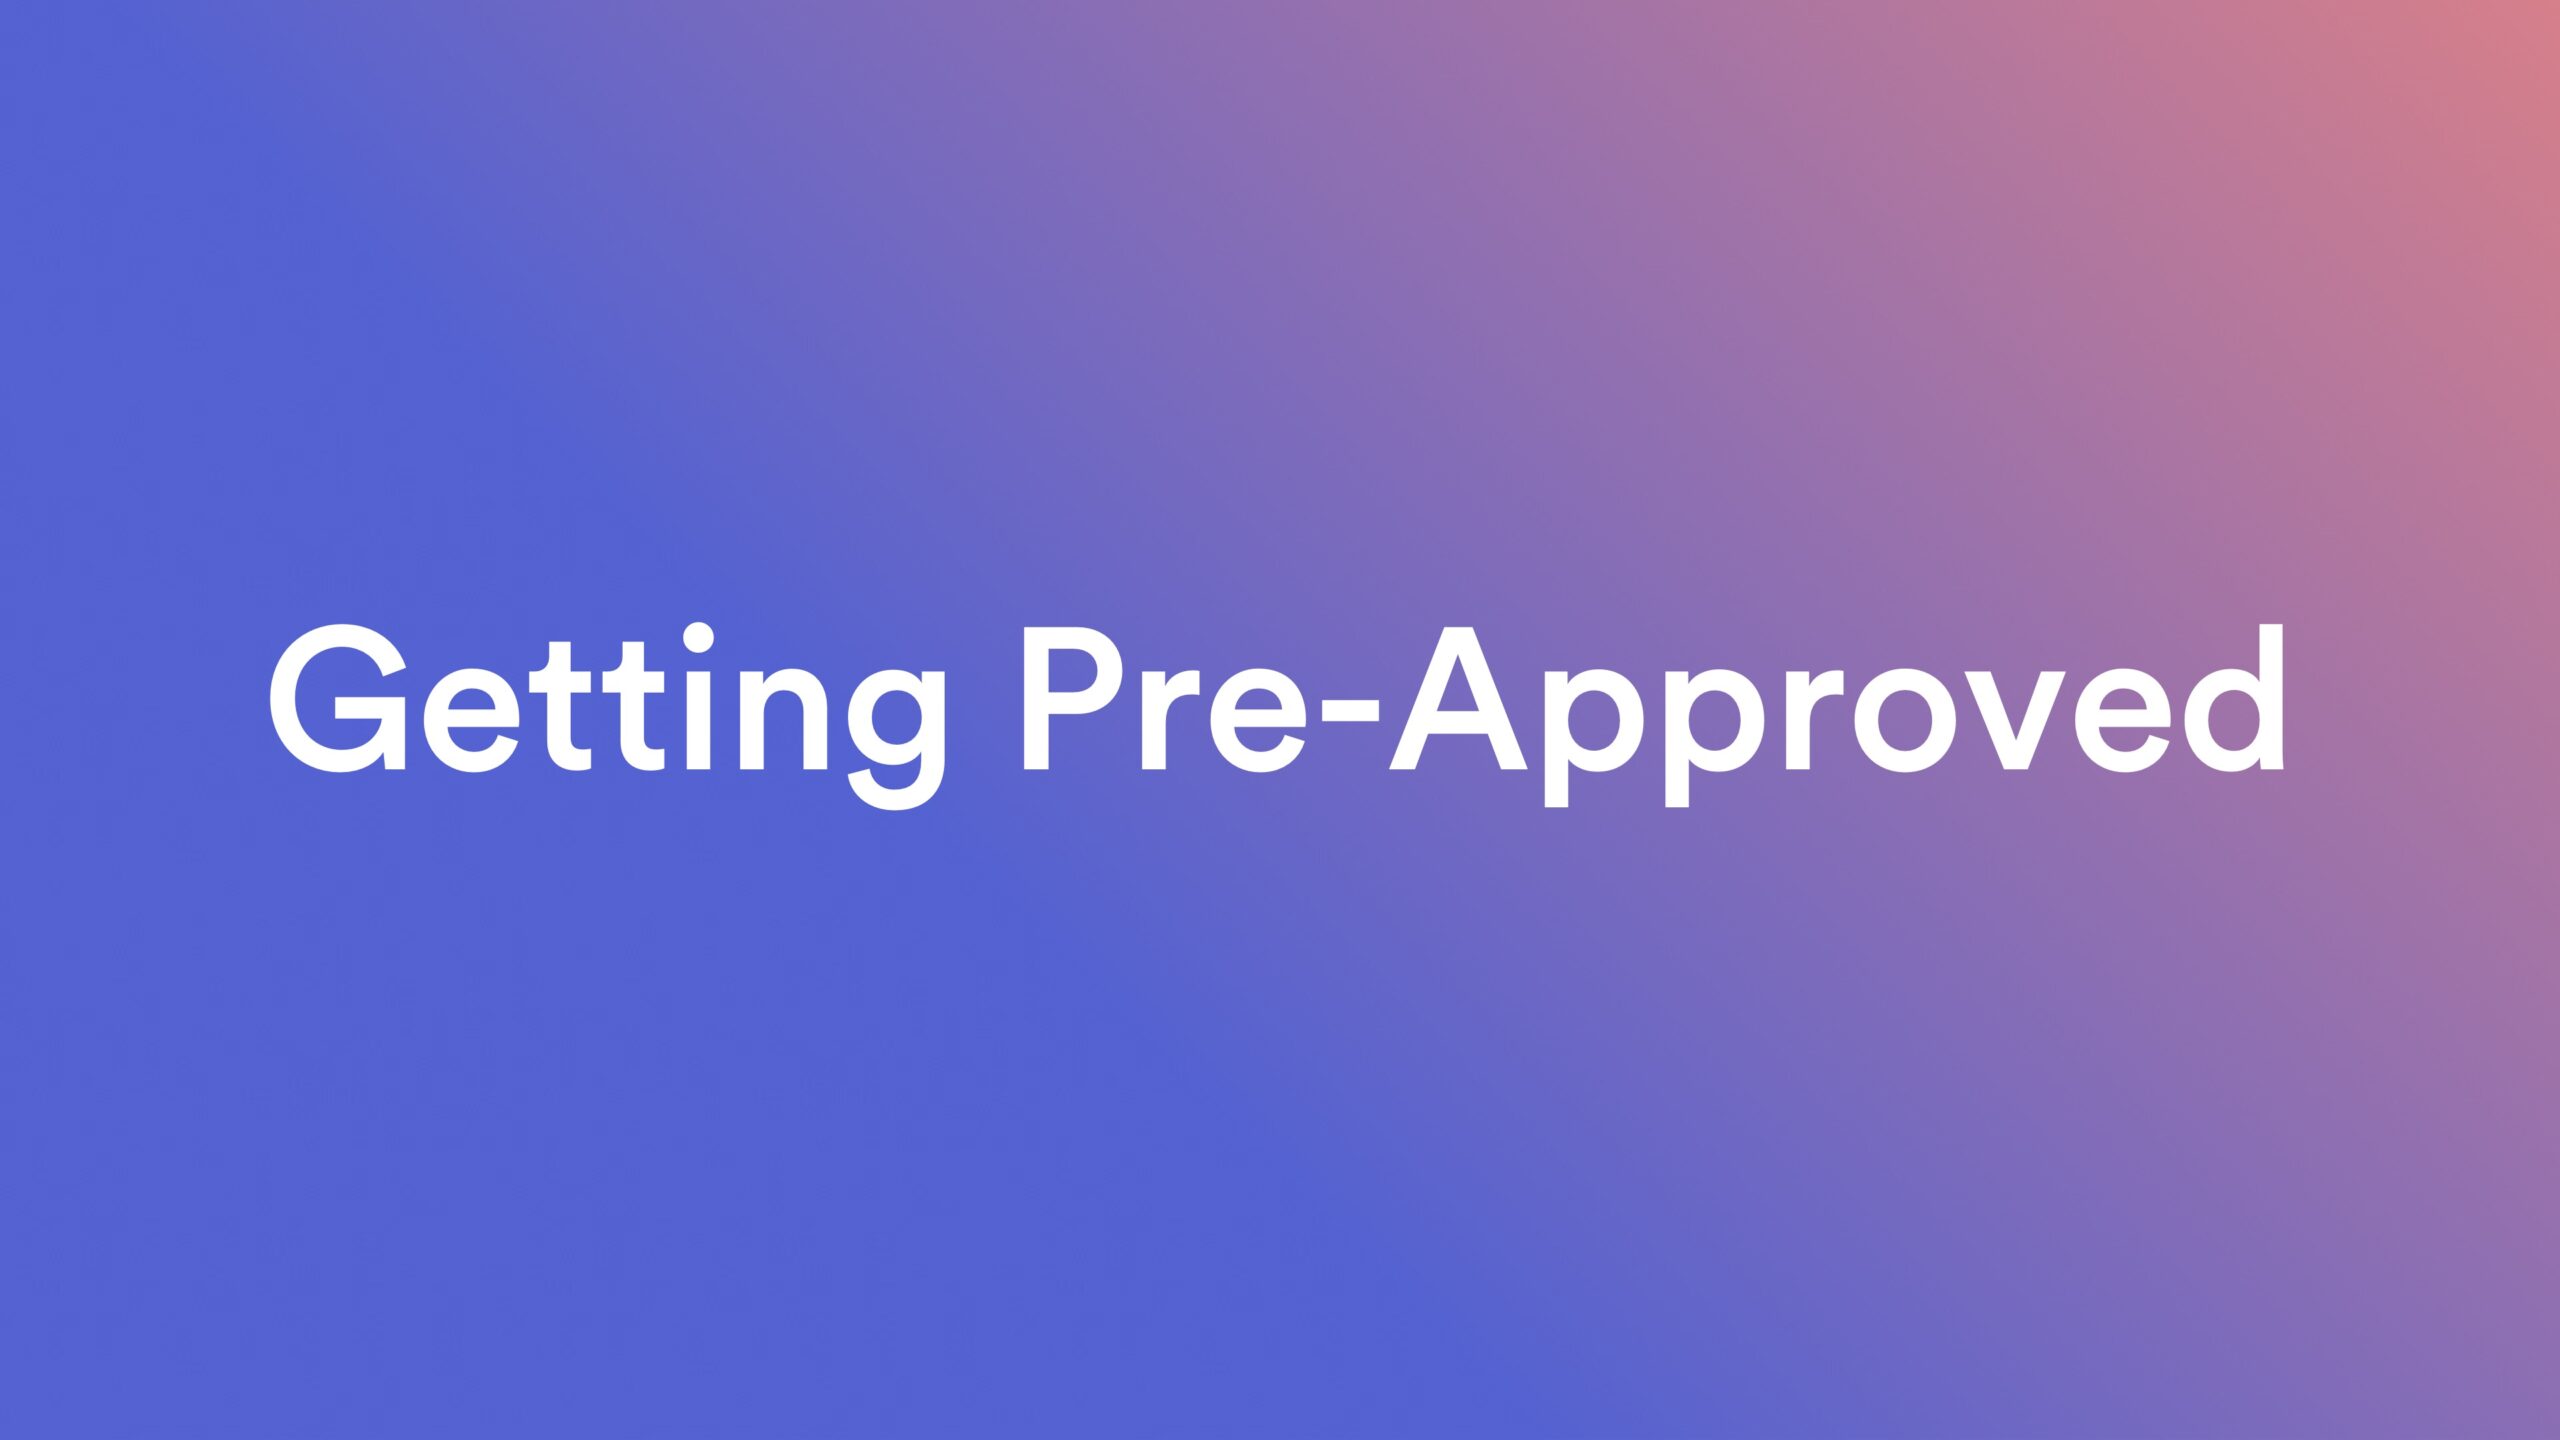 Graphic: Getting pre-approved